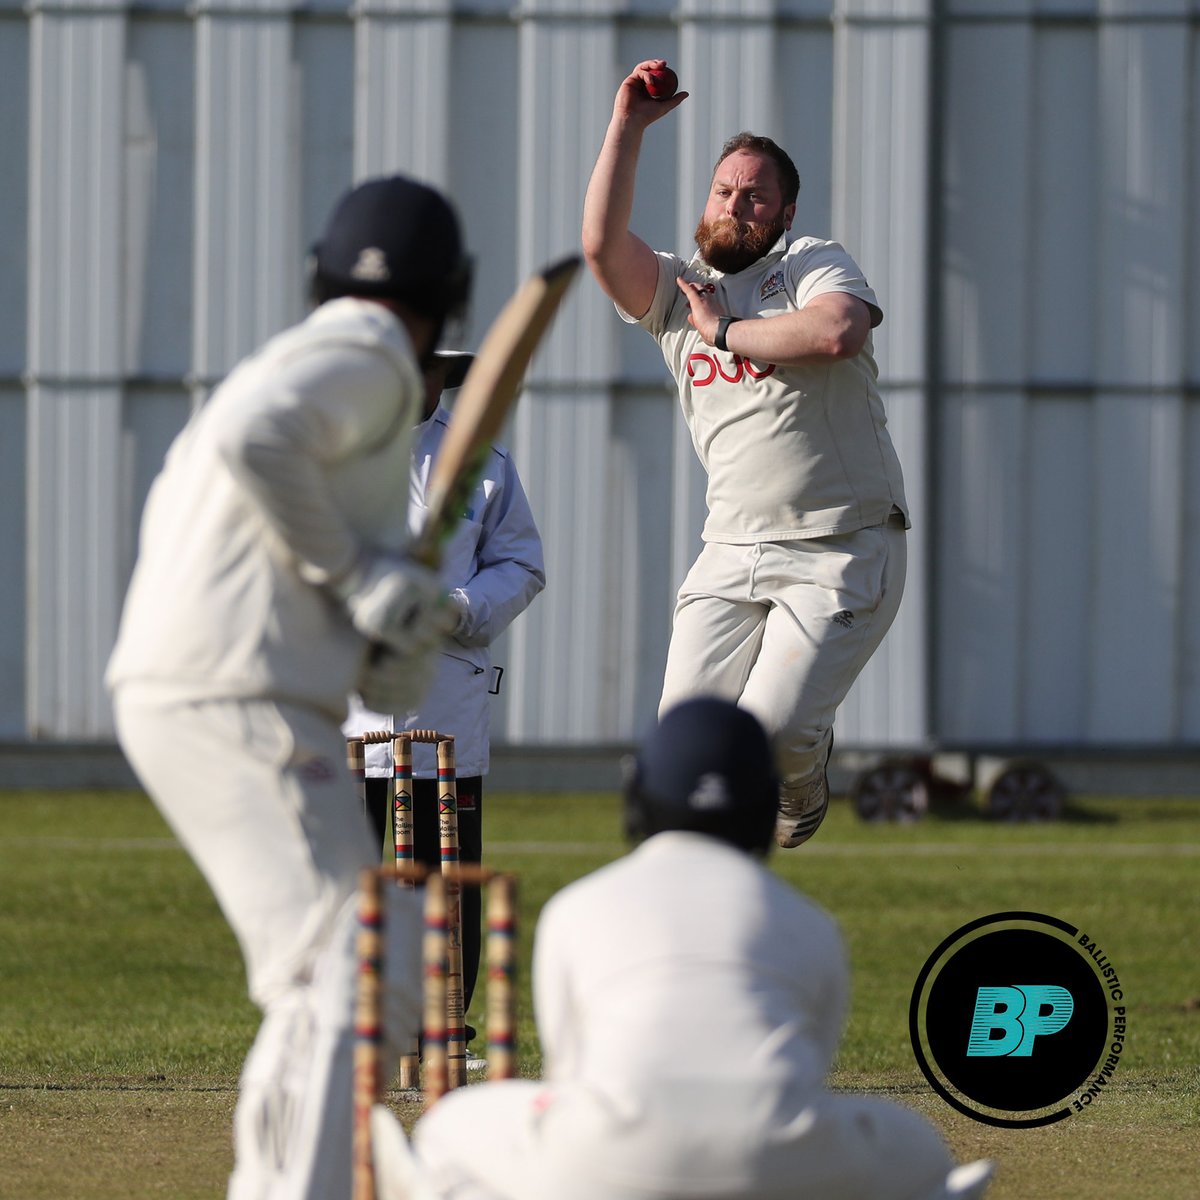 𝐑𝐈𝐓𝐂𝐇 𝐏𝐈𝐂𝐊𝐈𝐍𝐆𝐒 𝐎𝐍 𝐎𝐏𝐄𝐍𝐈𝐍𝐆 𝐃𝐀𝐘 It was a gr-eight start to the season for the third team and bowler Stephen Ritchie. He returned stunning figures of 8 for 13 to give Prestwich victory by 88 runs. The 3rds were the first senior team to hit a ball in anger…